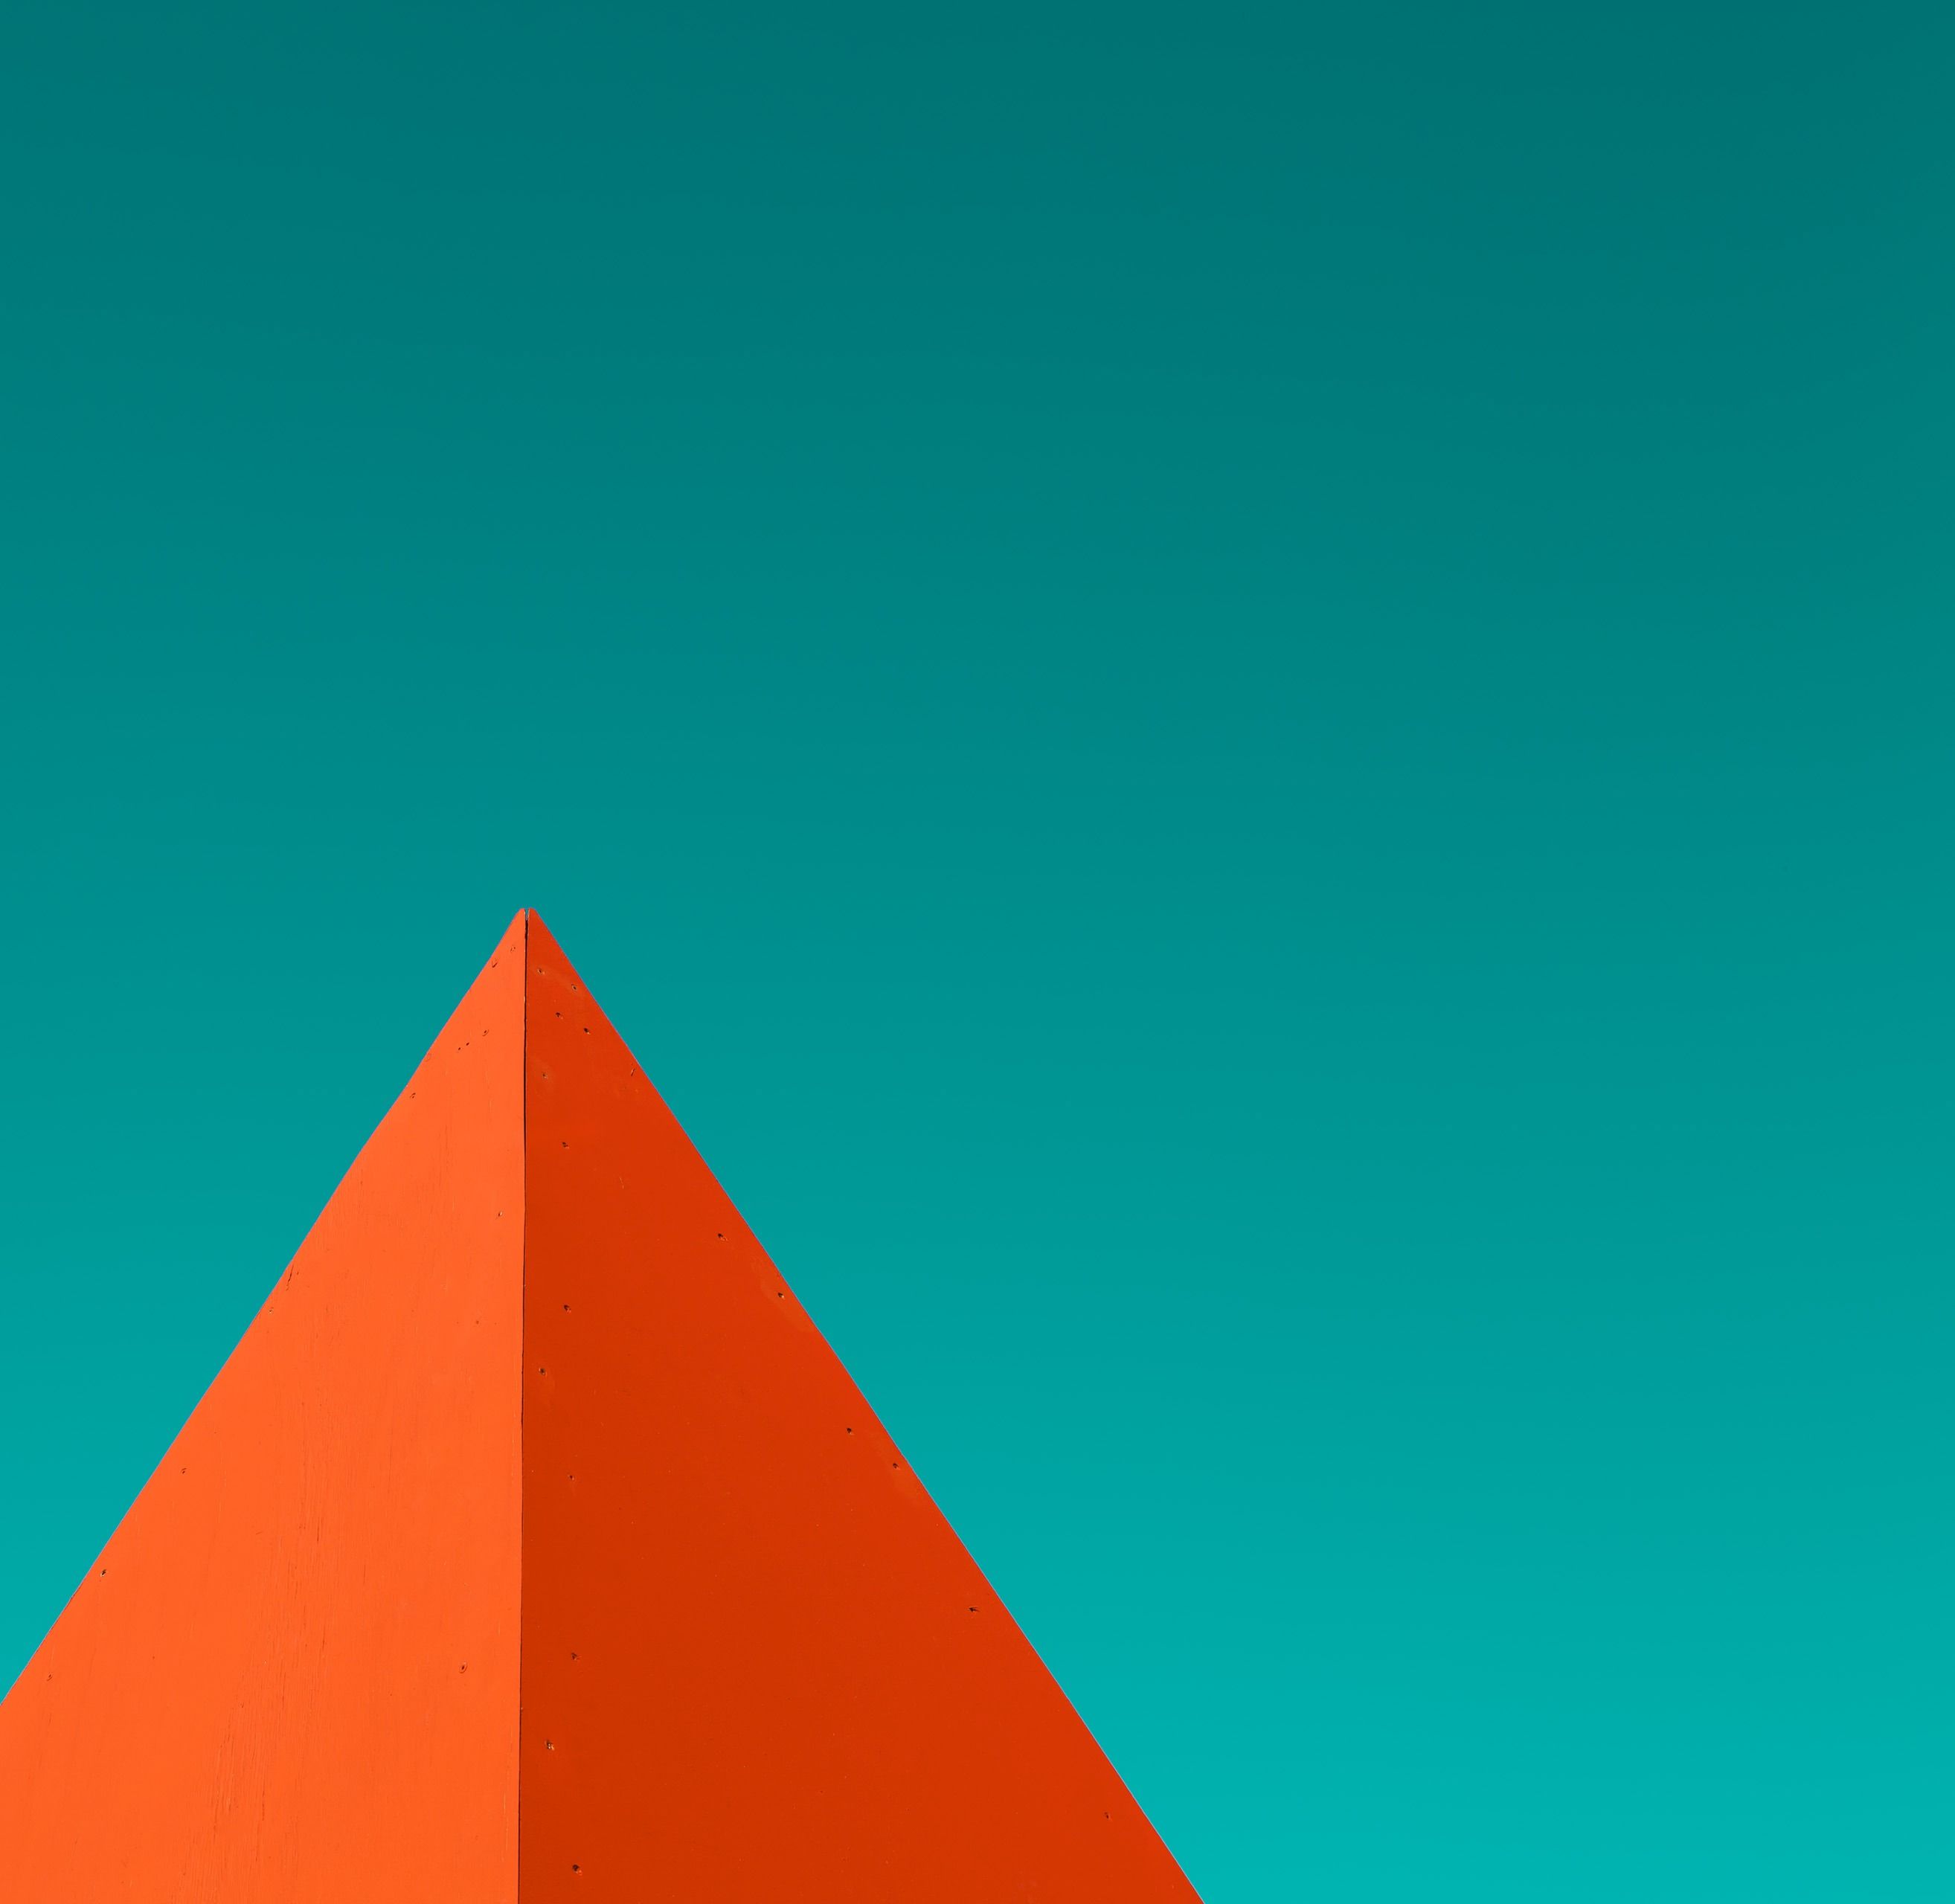 Download: 11 Wallpapers From Android 5.0 Lollipop